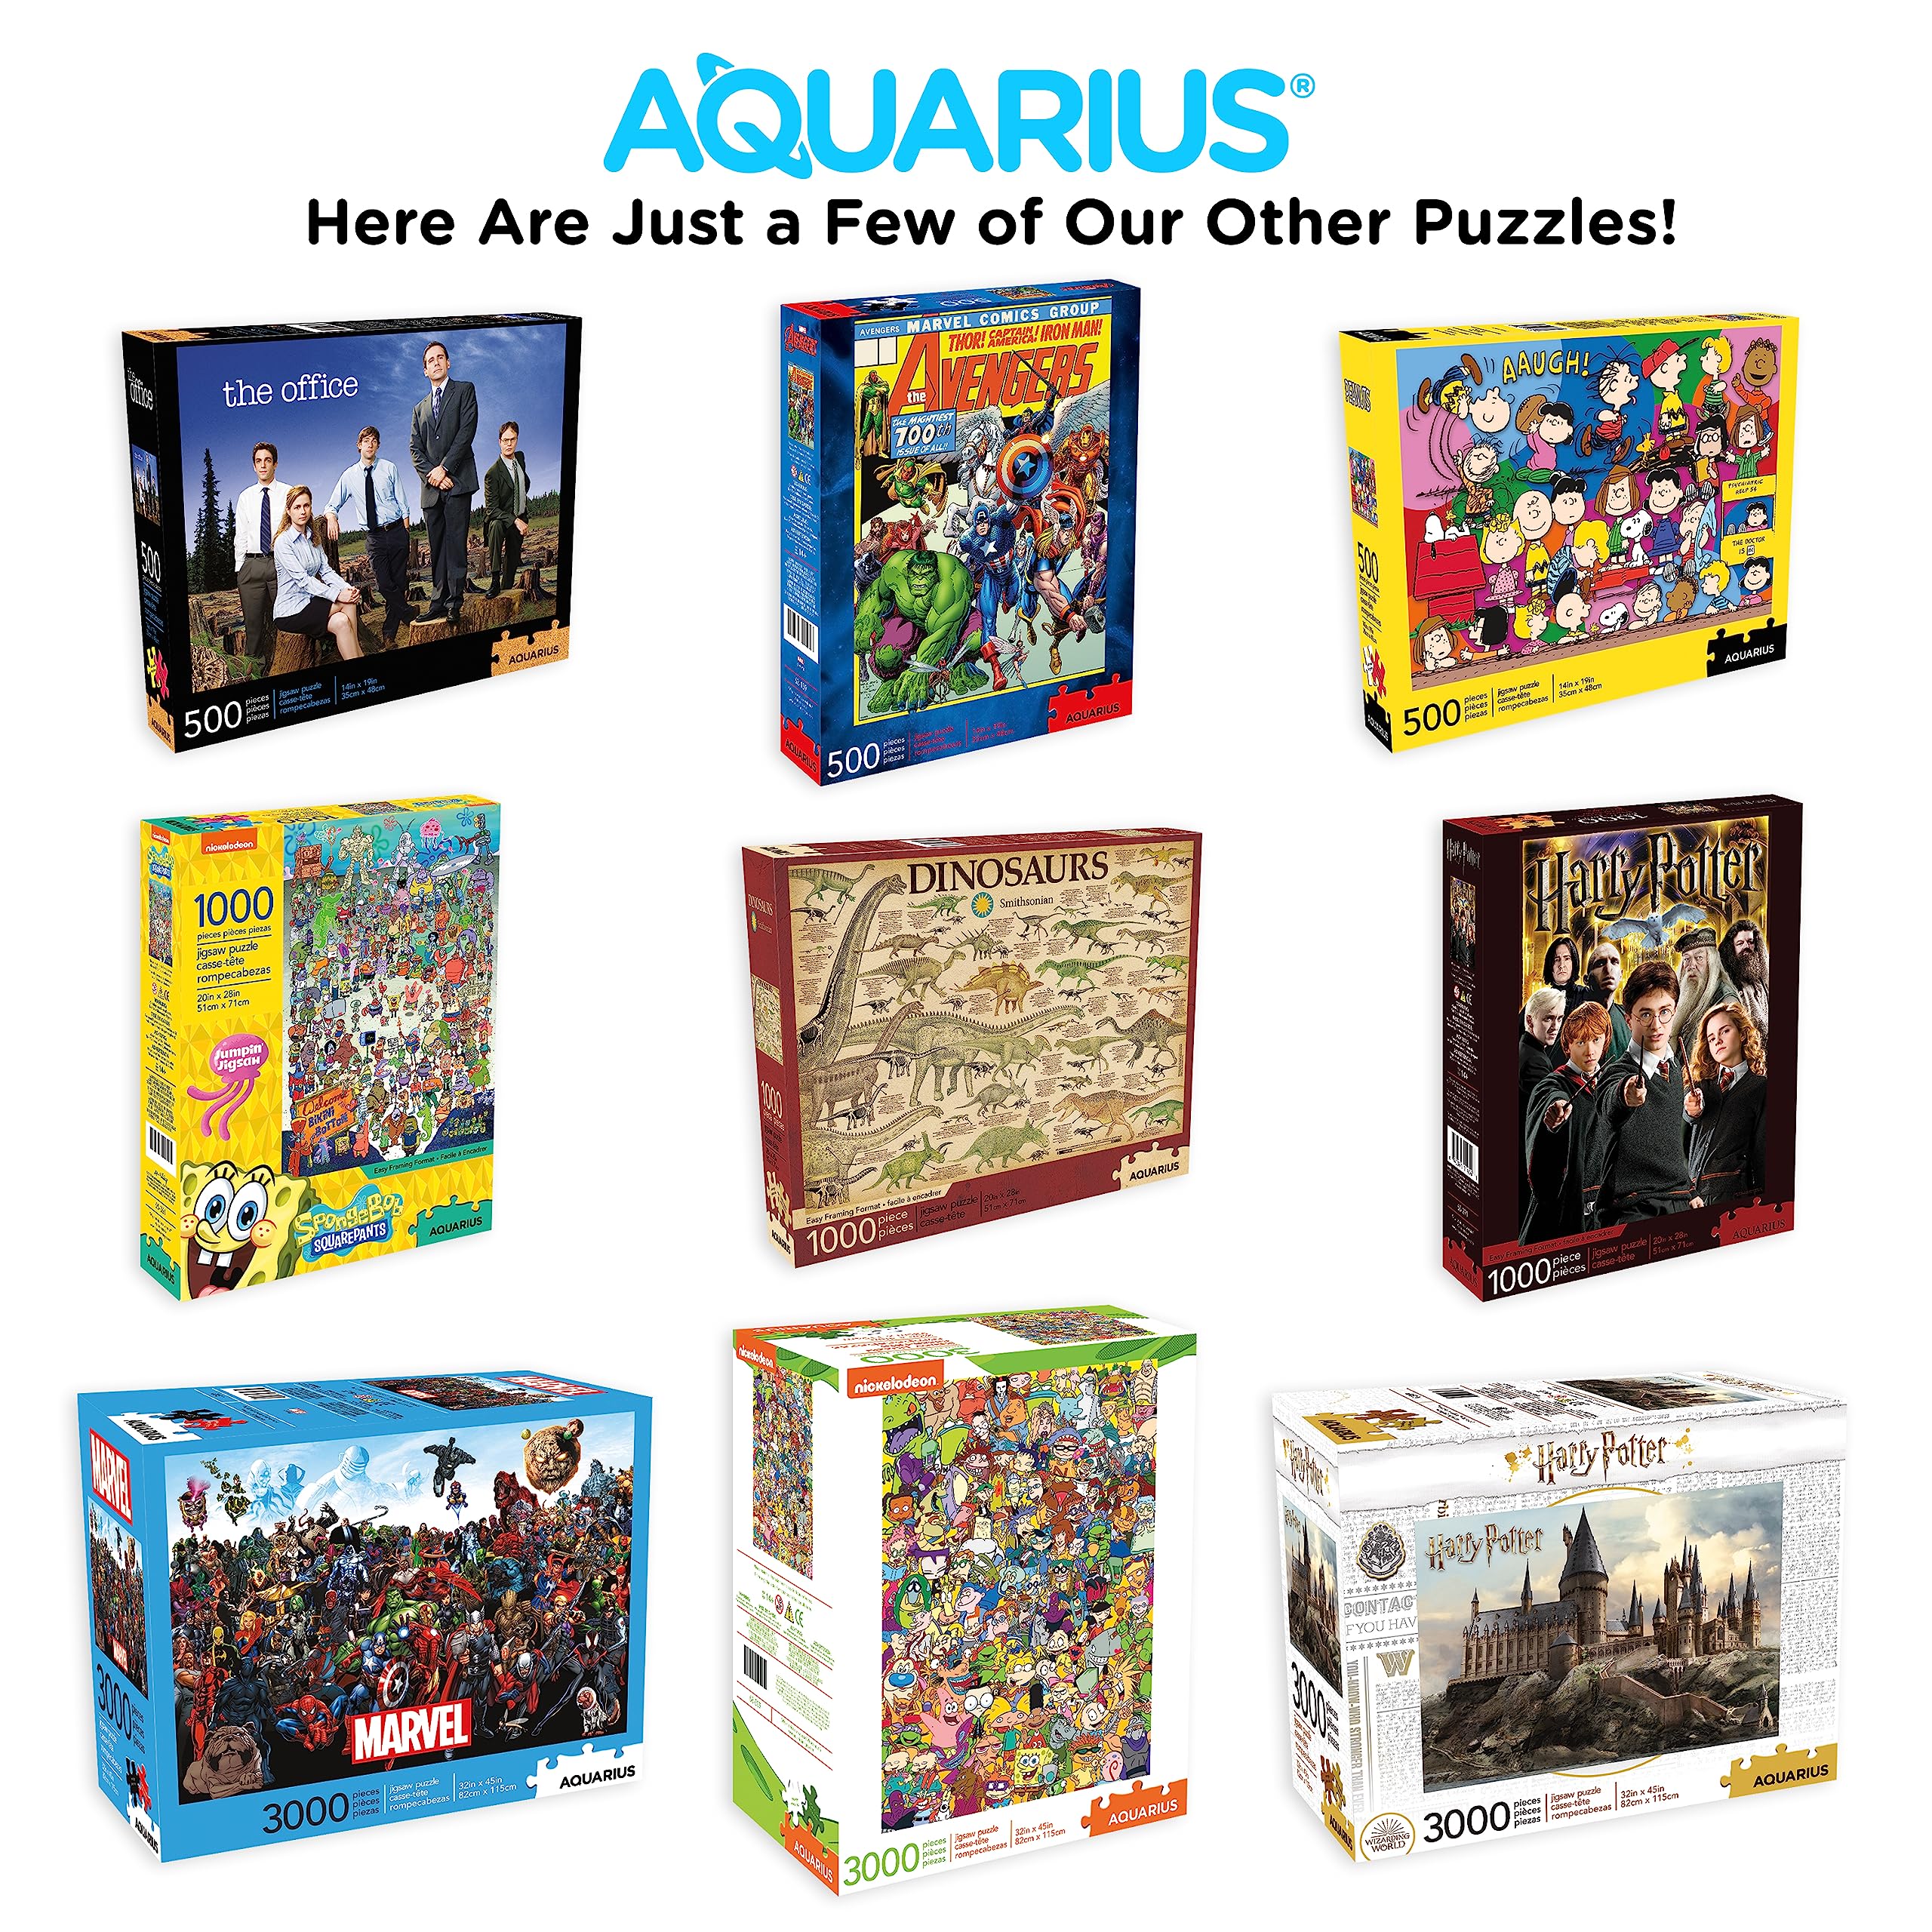 AQUARIUS Guardians of The Galaxy Timeline Puzzle (1000 Piece Jigsaw Puzzle) - Glare Free - Precision Fit - Virtually No Puzzle Dust - Officially Licensed Marvel Merchandise & Collectibles - 20x27 in